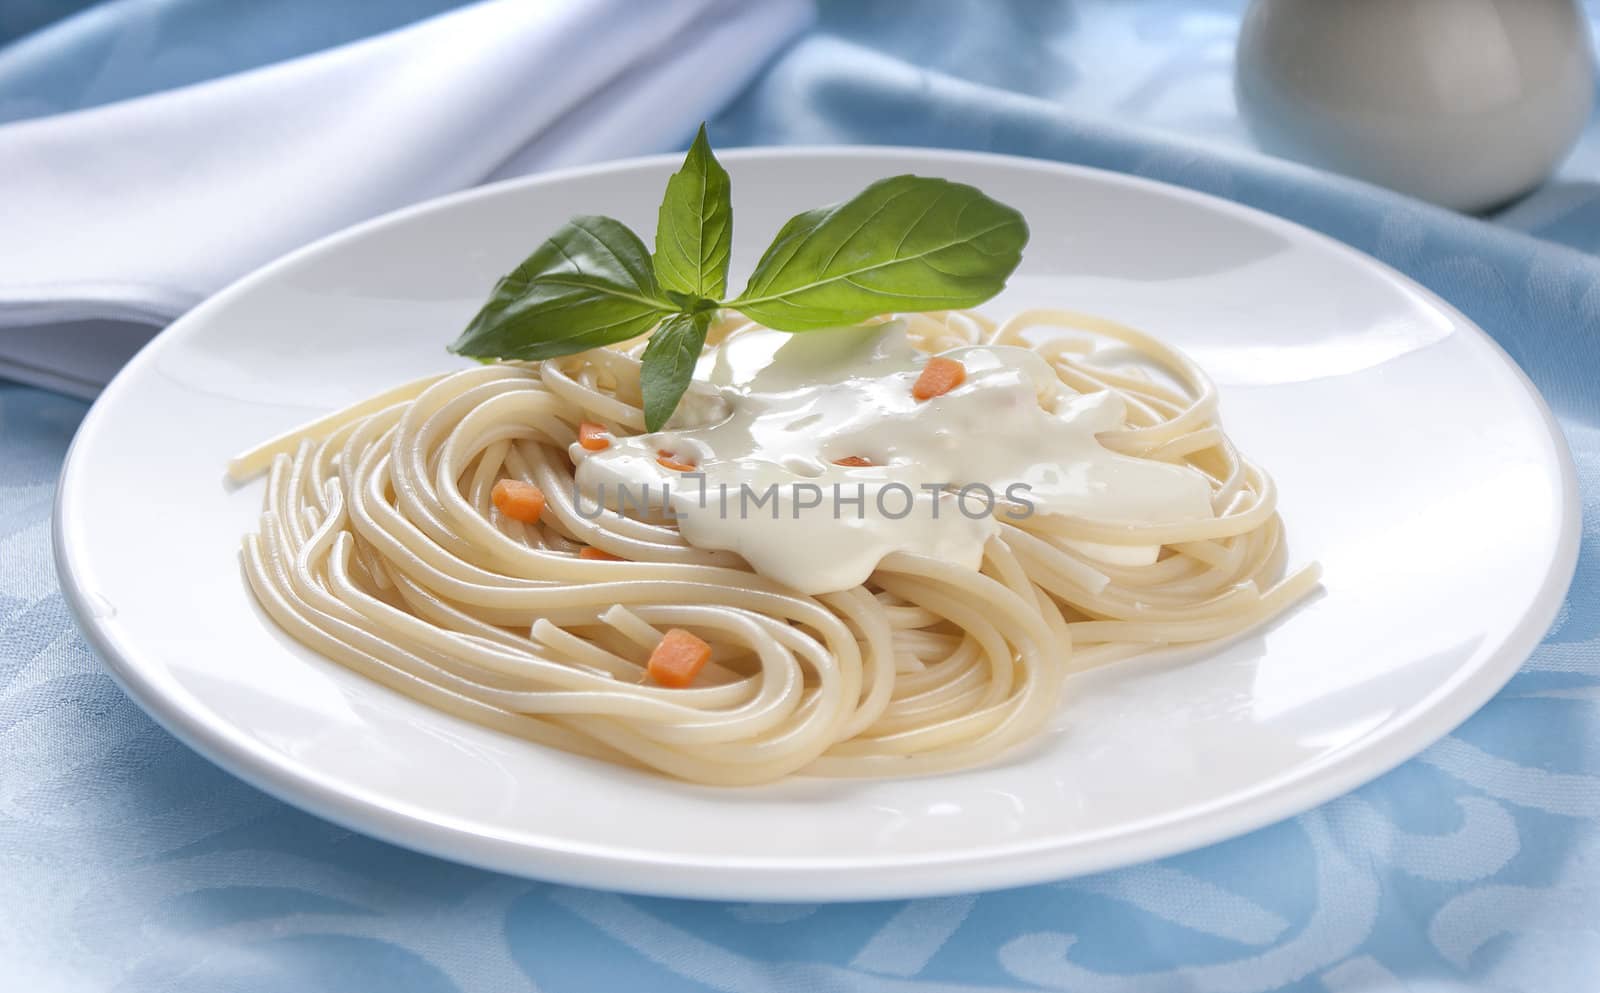 Spaghetti with cheese-cream sauce, carrot and basil on the white plate